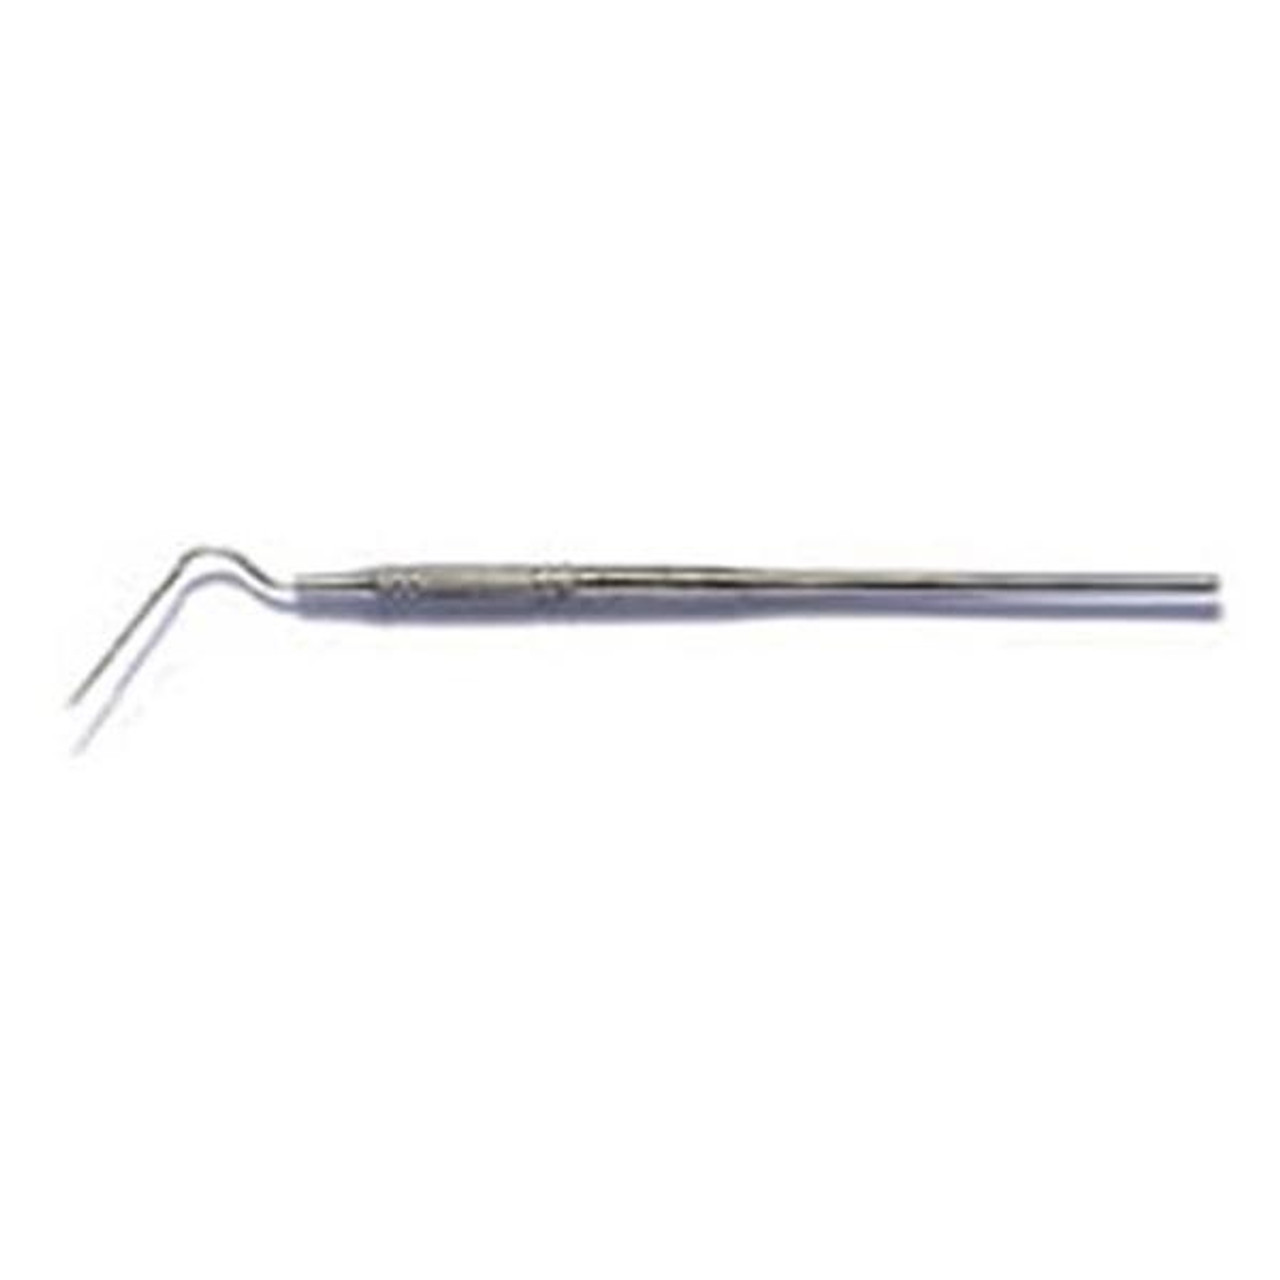 Hu-Friedy - 11 Single End Root Canal Plugger - (P) #32 Round Handle